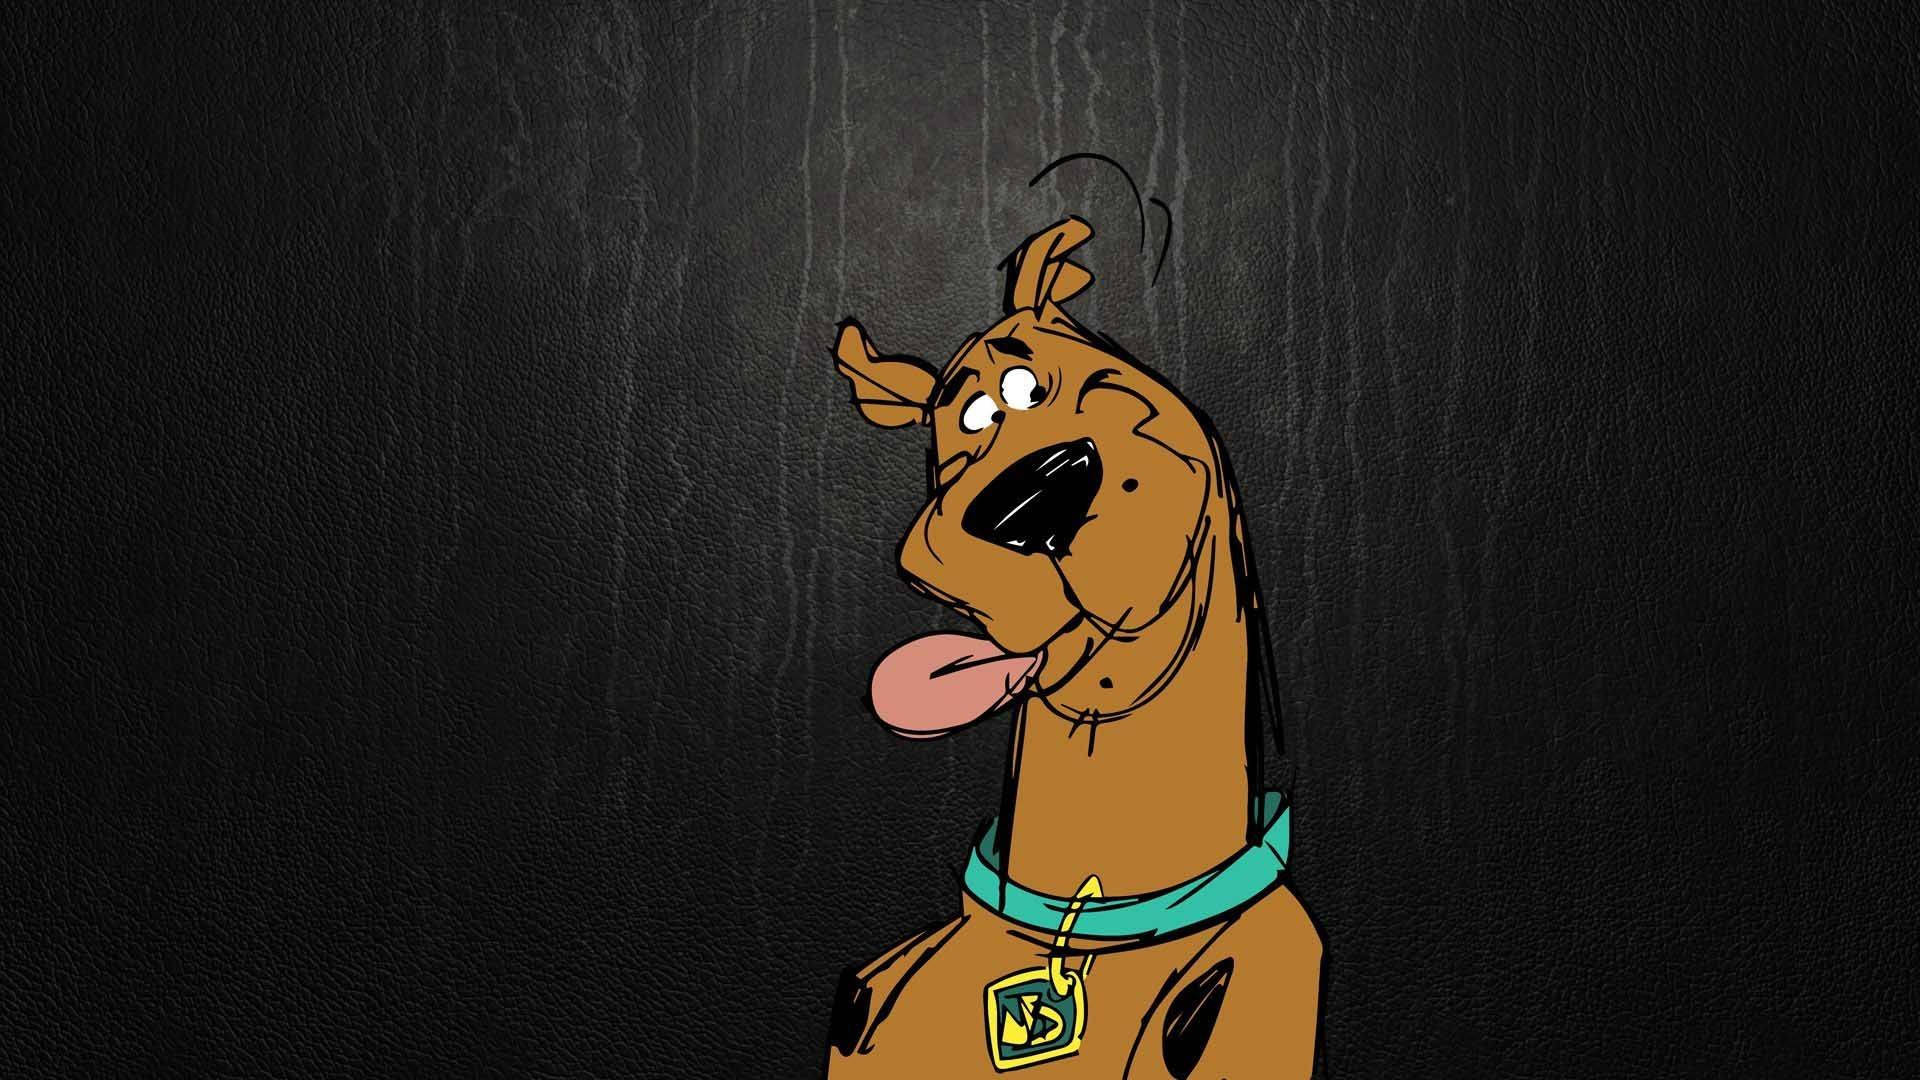 Scooby Doo With Silly Pose Wallpaper